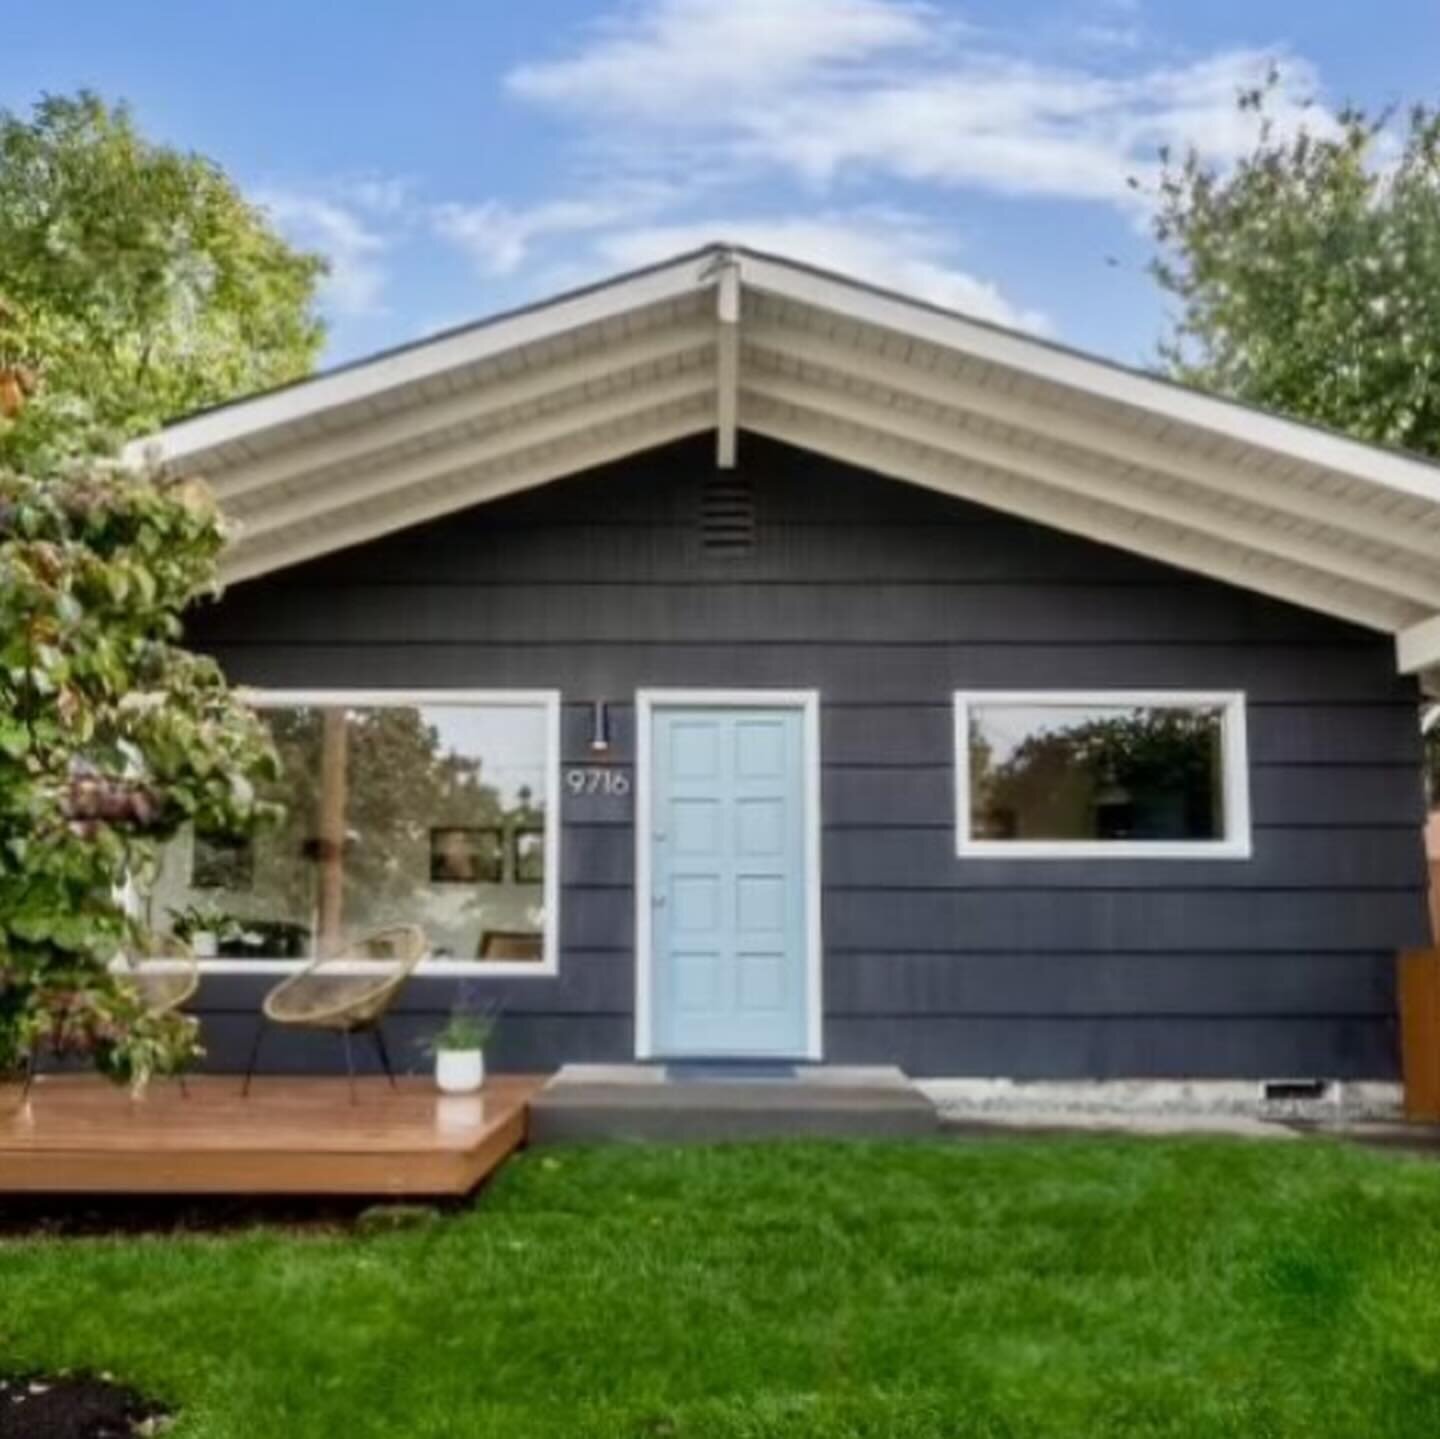 OPEN THIS WEEKEND!! Sat 11-3 + Sun 11-1. 

One-level living at this sweet mid-century ranchalow&trade;️!

This one lives way larger than its sq footage&mdash;open floor plan, three bedrooms, an added half bath, a sleek shipping container with electri